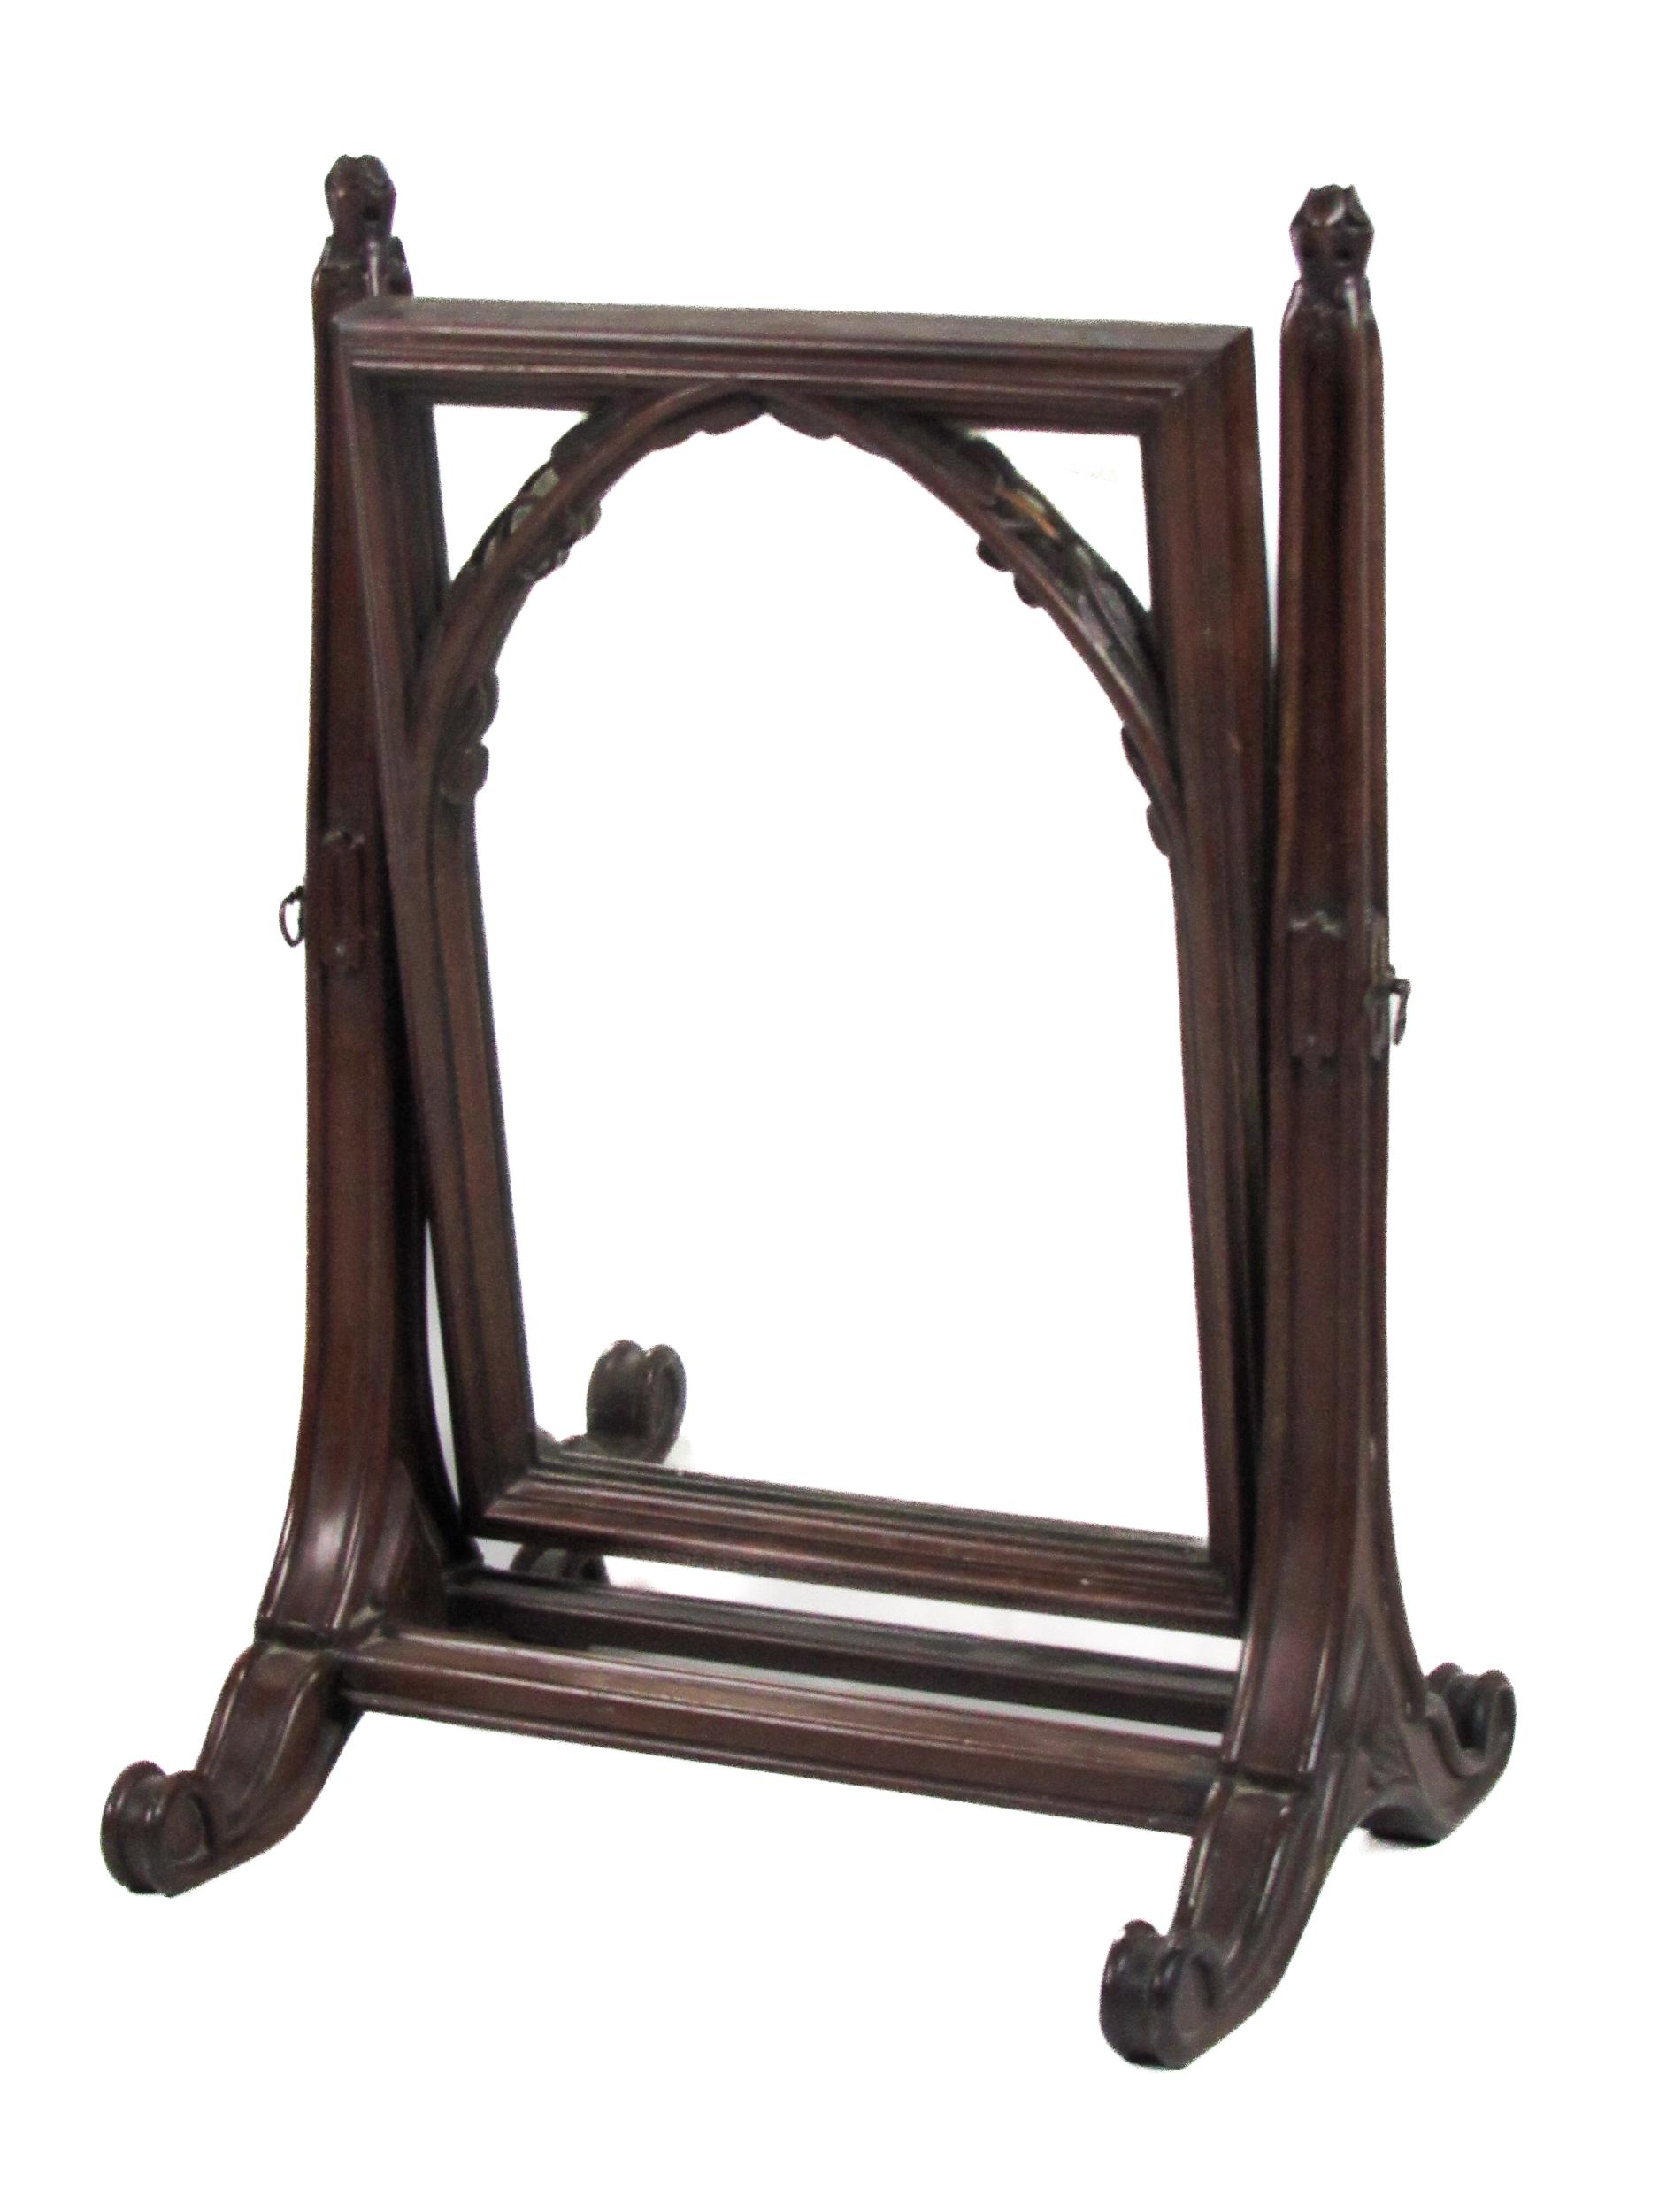 An unusual 19th Century mahogany framed Gothic style swing frame Dressing Table Mirror, with